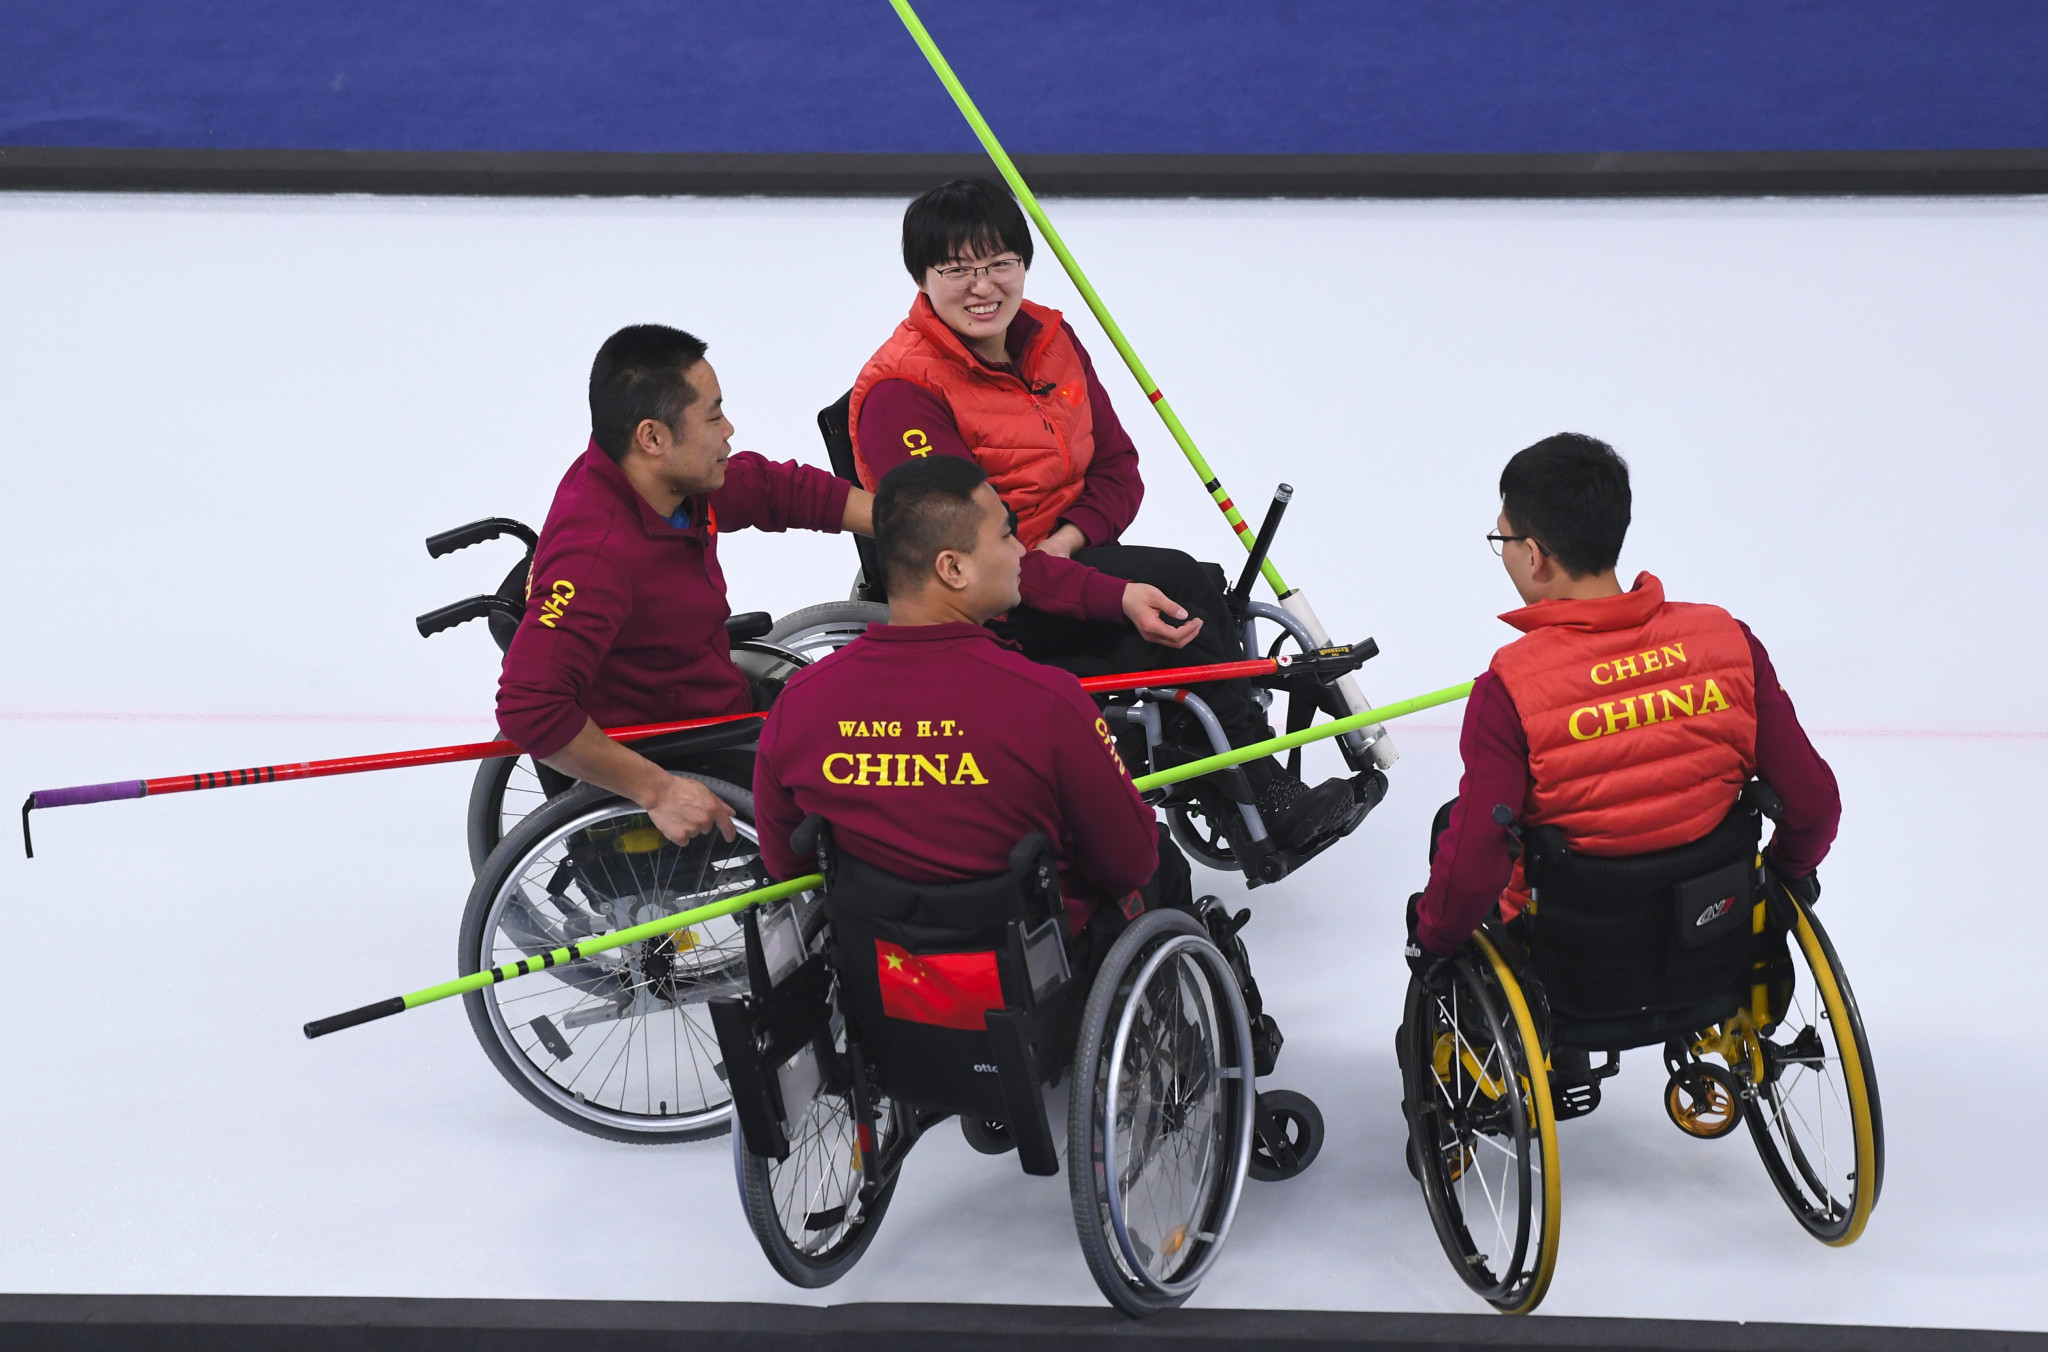 Chinese wheelchair curling team claim IPC Allianz Best Team of the Month award after Pyeongchang 2018 triumph